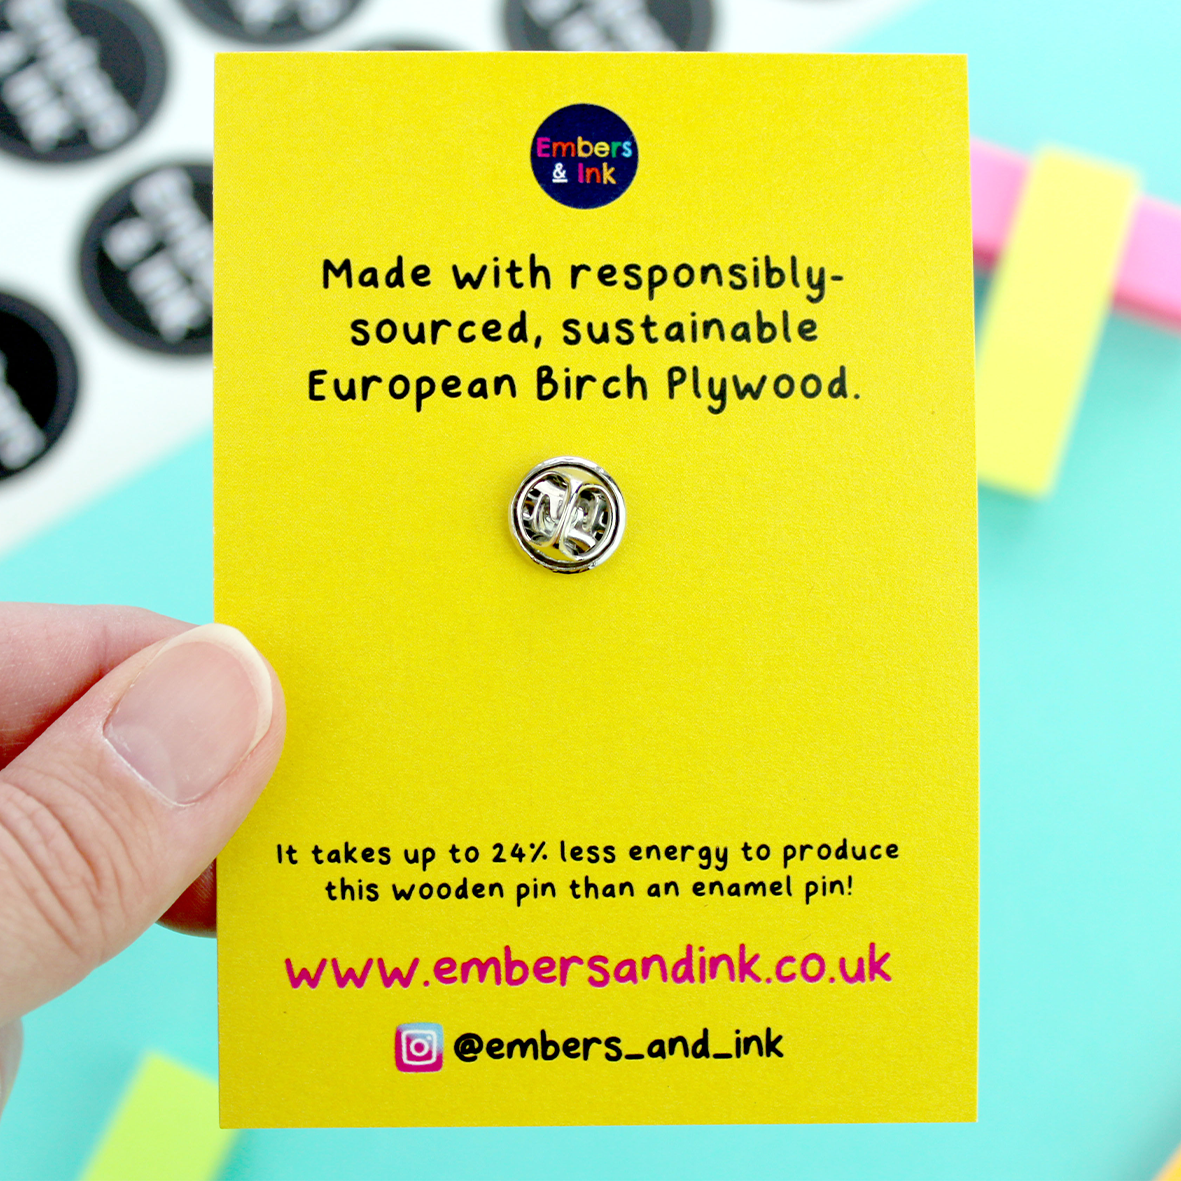 The rear of the cardboard backer is shown. it is yellow with black writing that reads:' made with responsibly-sourced sustainable european birtch plywood. It takes up to 24% less energy to produce this wooden pin than an enamel pin! www dot embers and ink dot co dot uk. instagran @ embers underscore and underscore ink.